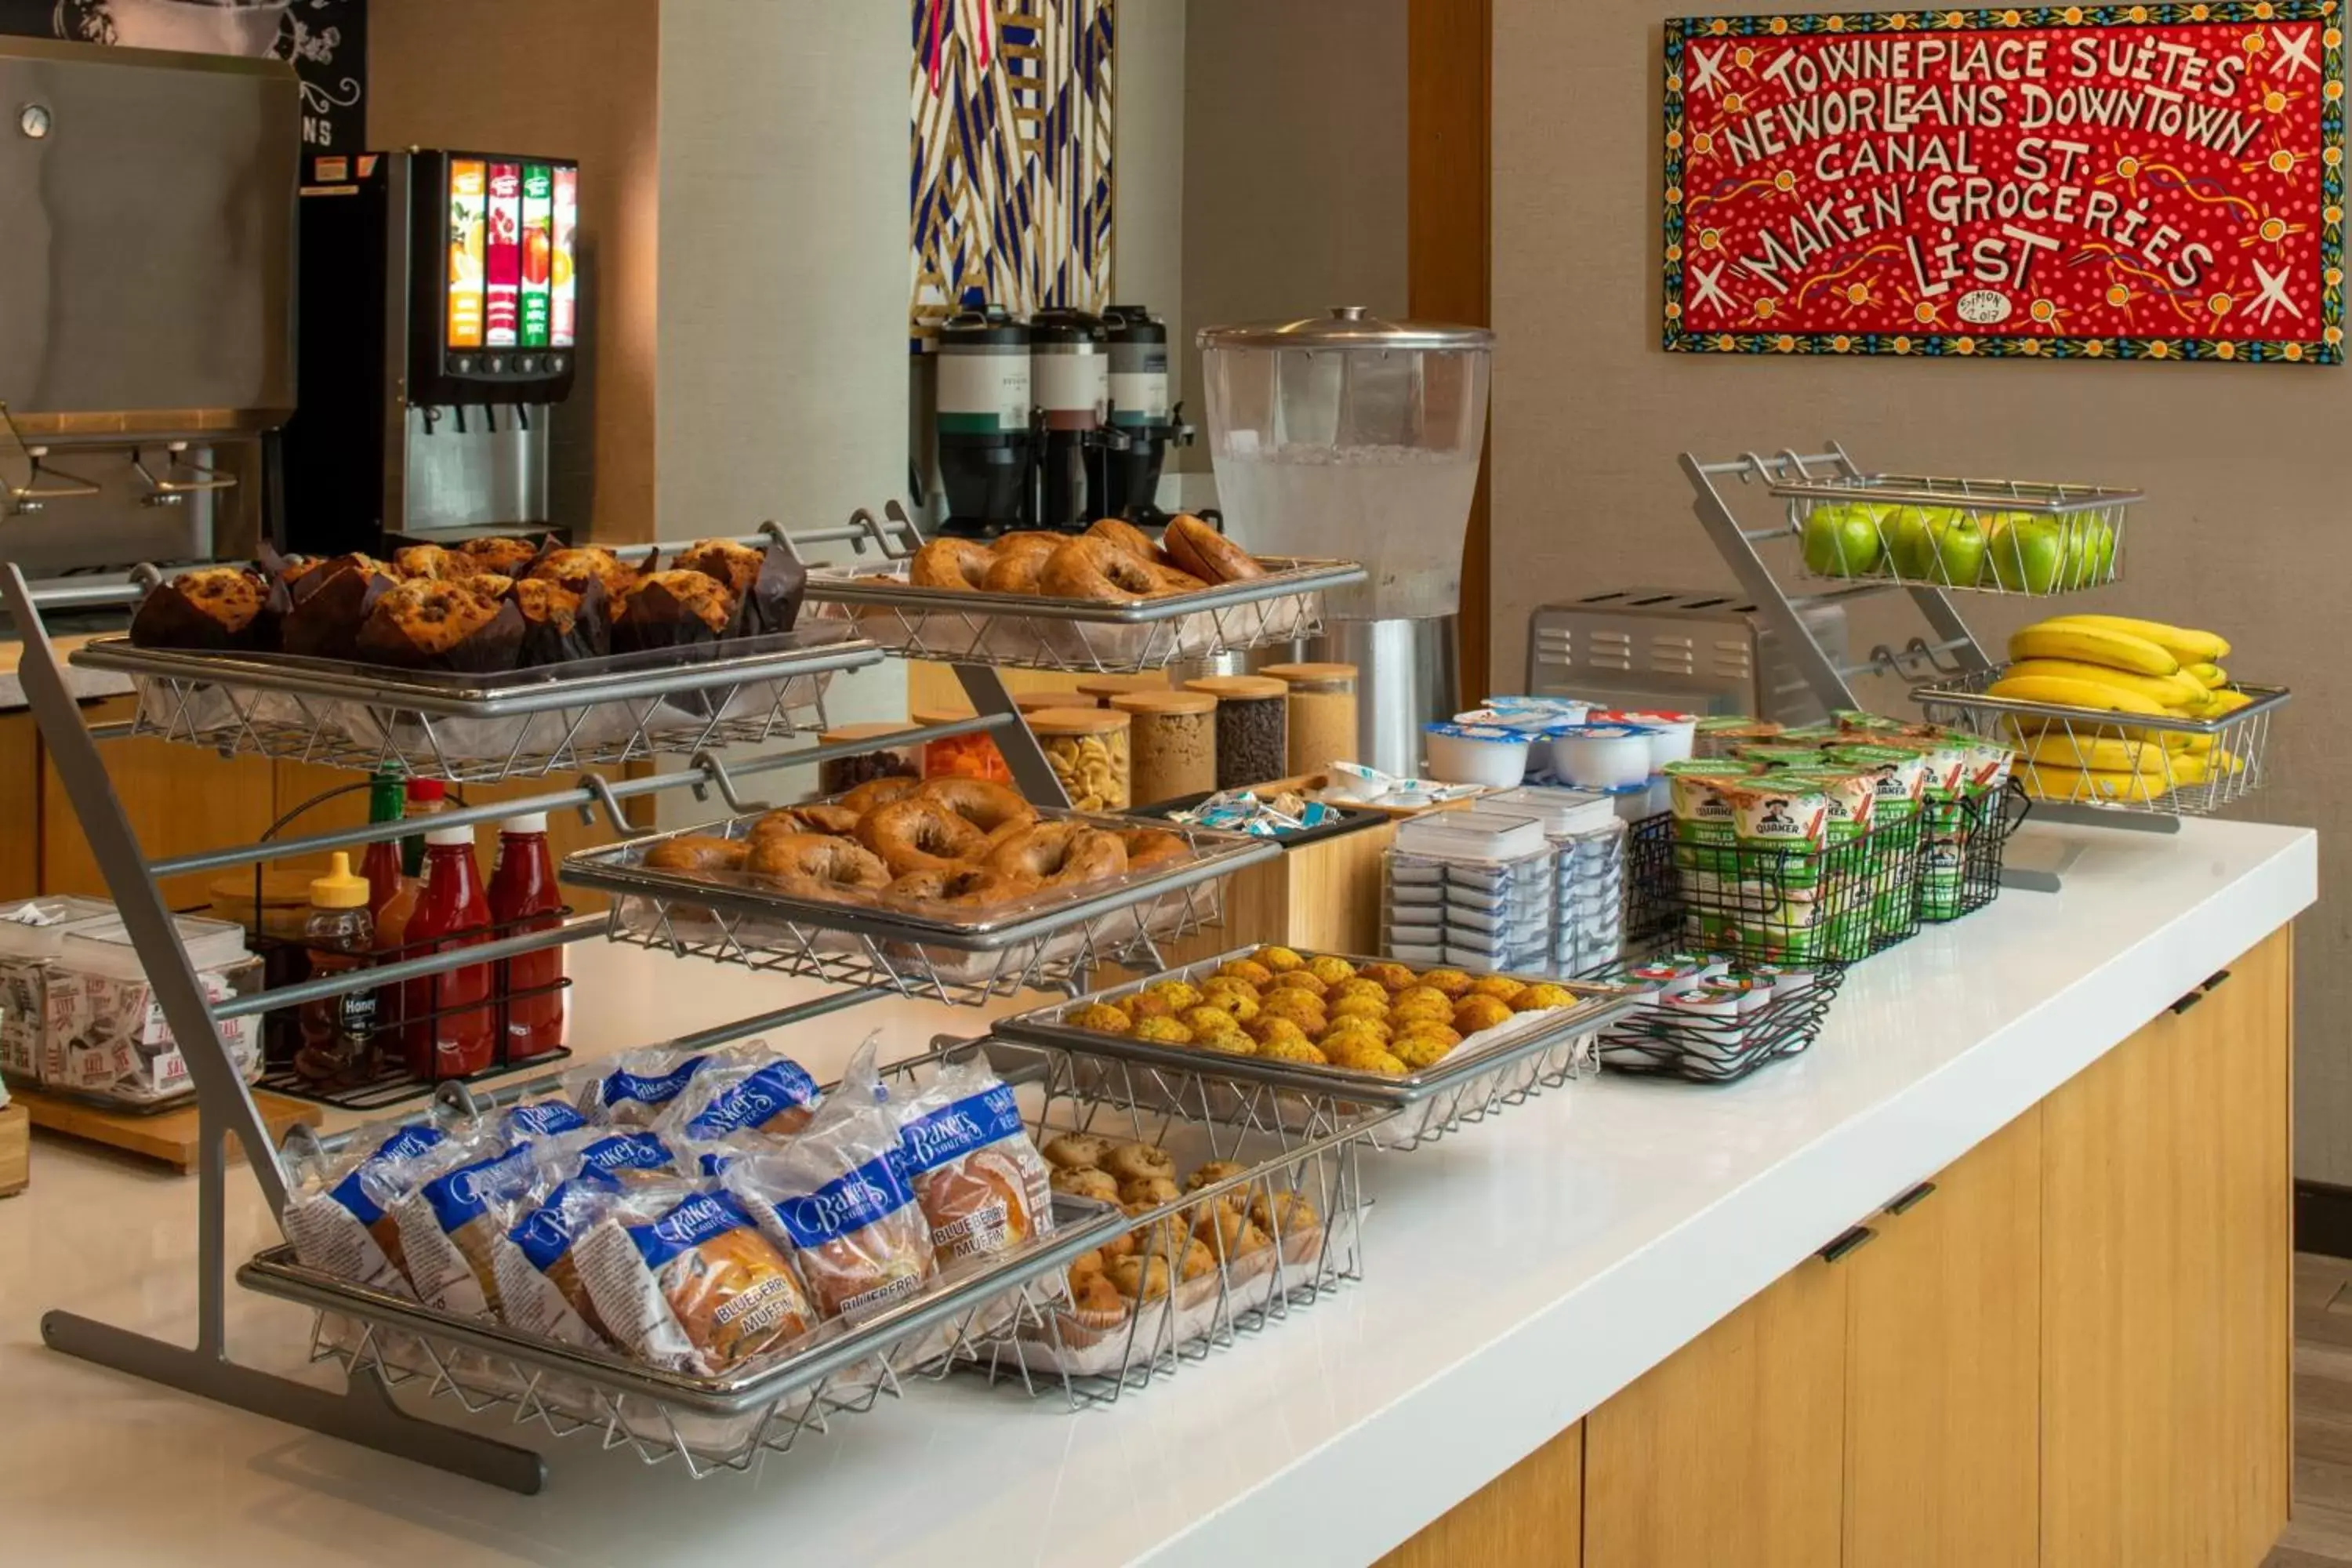 Breakfast, Food in SpringHill Suites by Marriott New Orleans Downtown/Canal Street